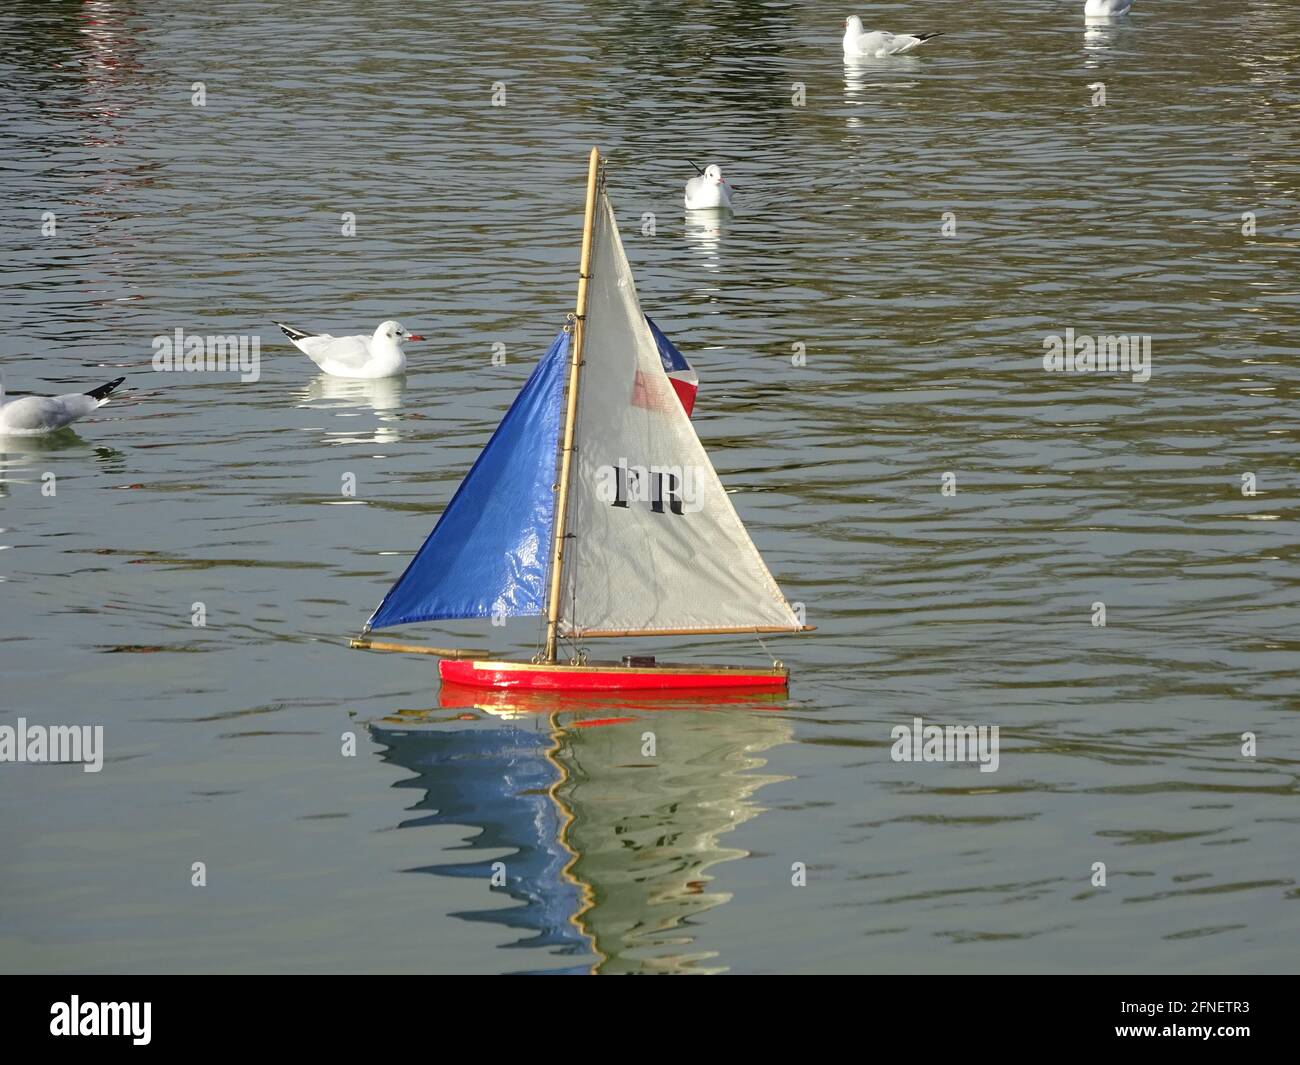 Toy Boat Photos and Premium, DSLR Stock Photo